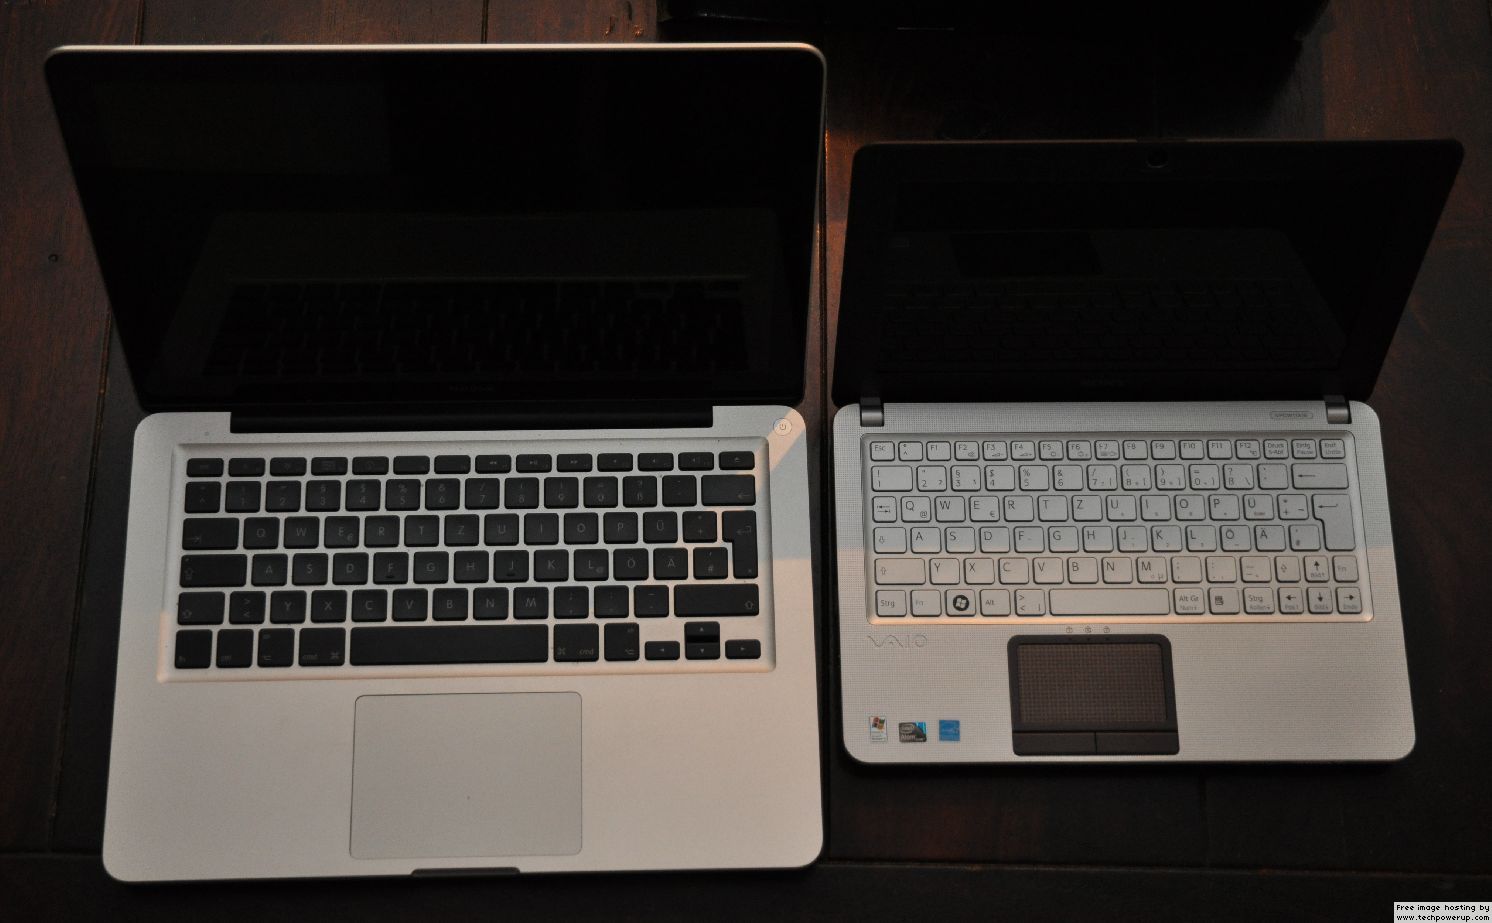 The Difference Aspects Between Notebook and Netbook